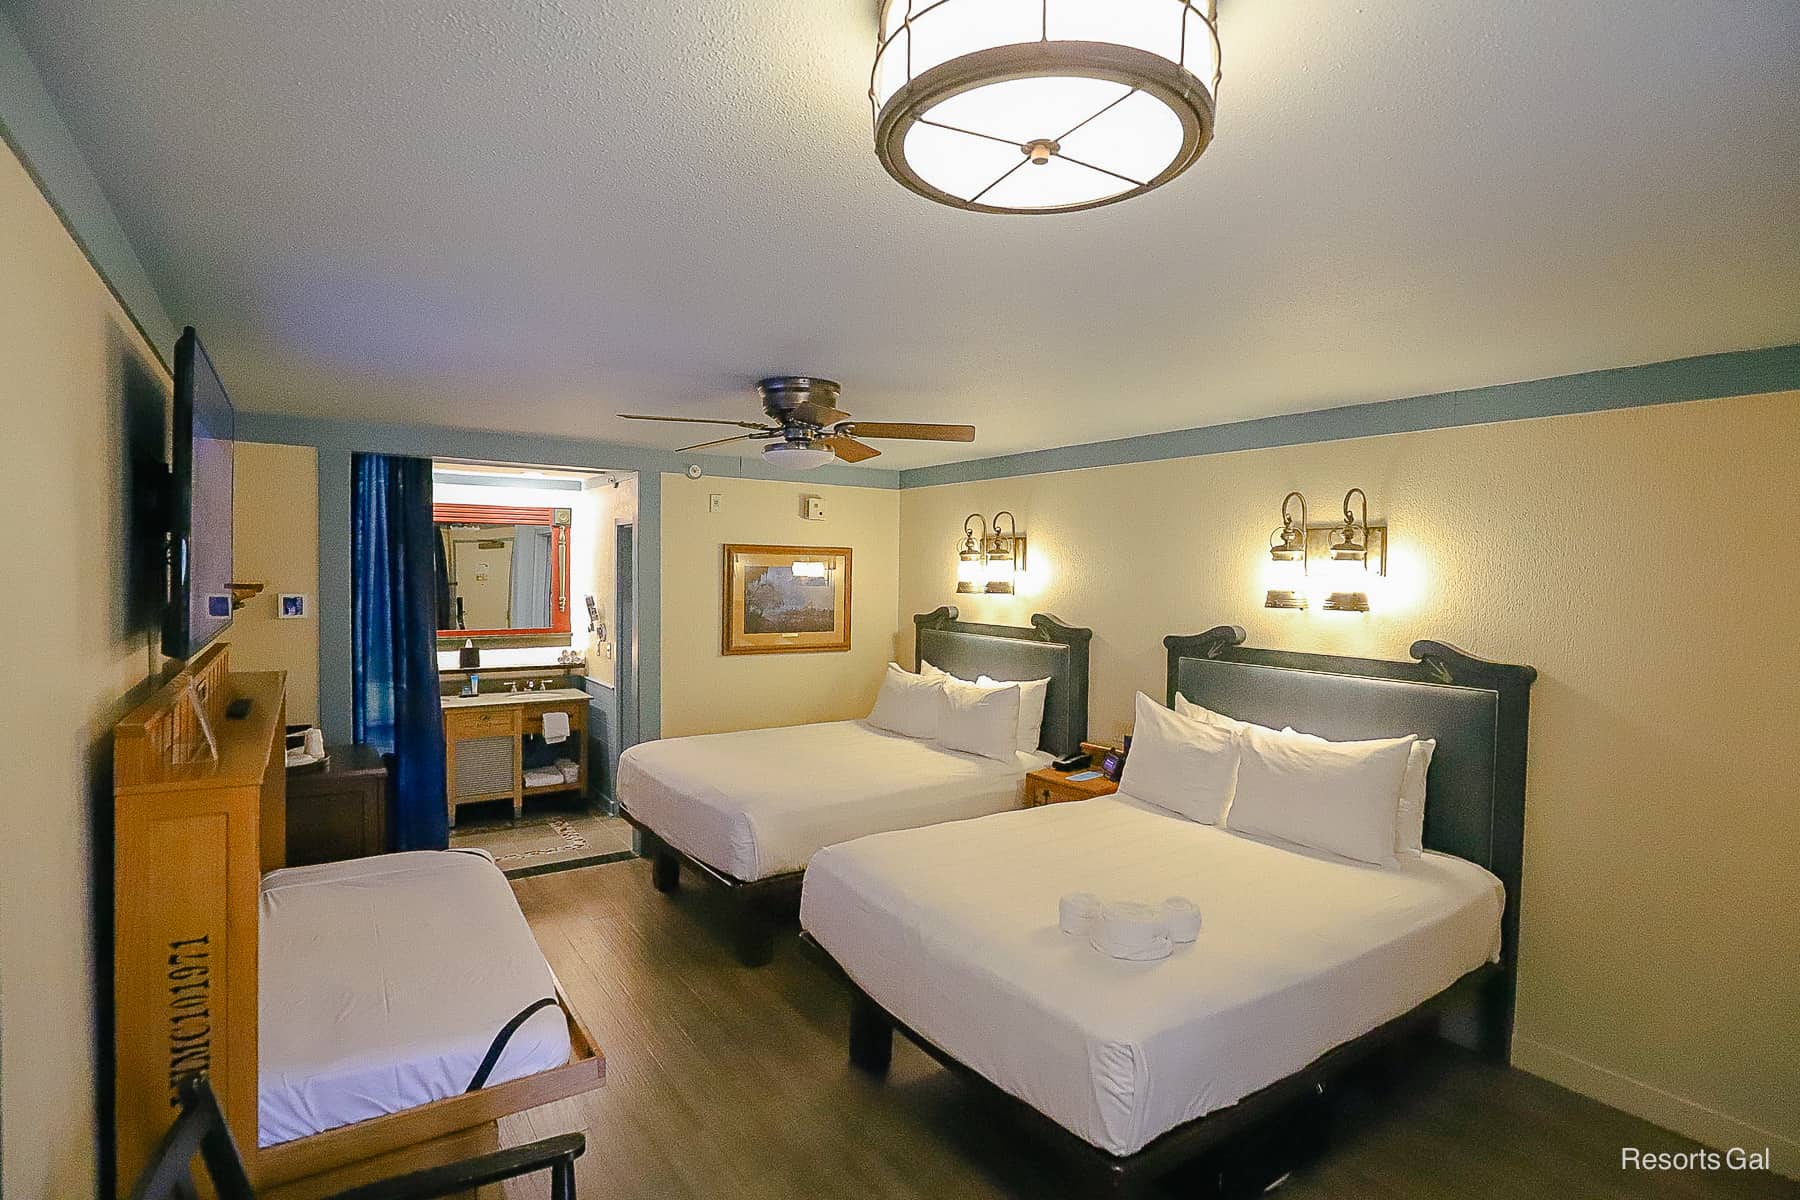 The room's light fixtures and ceiling fan 